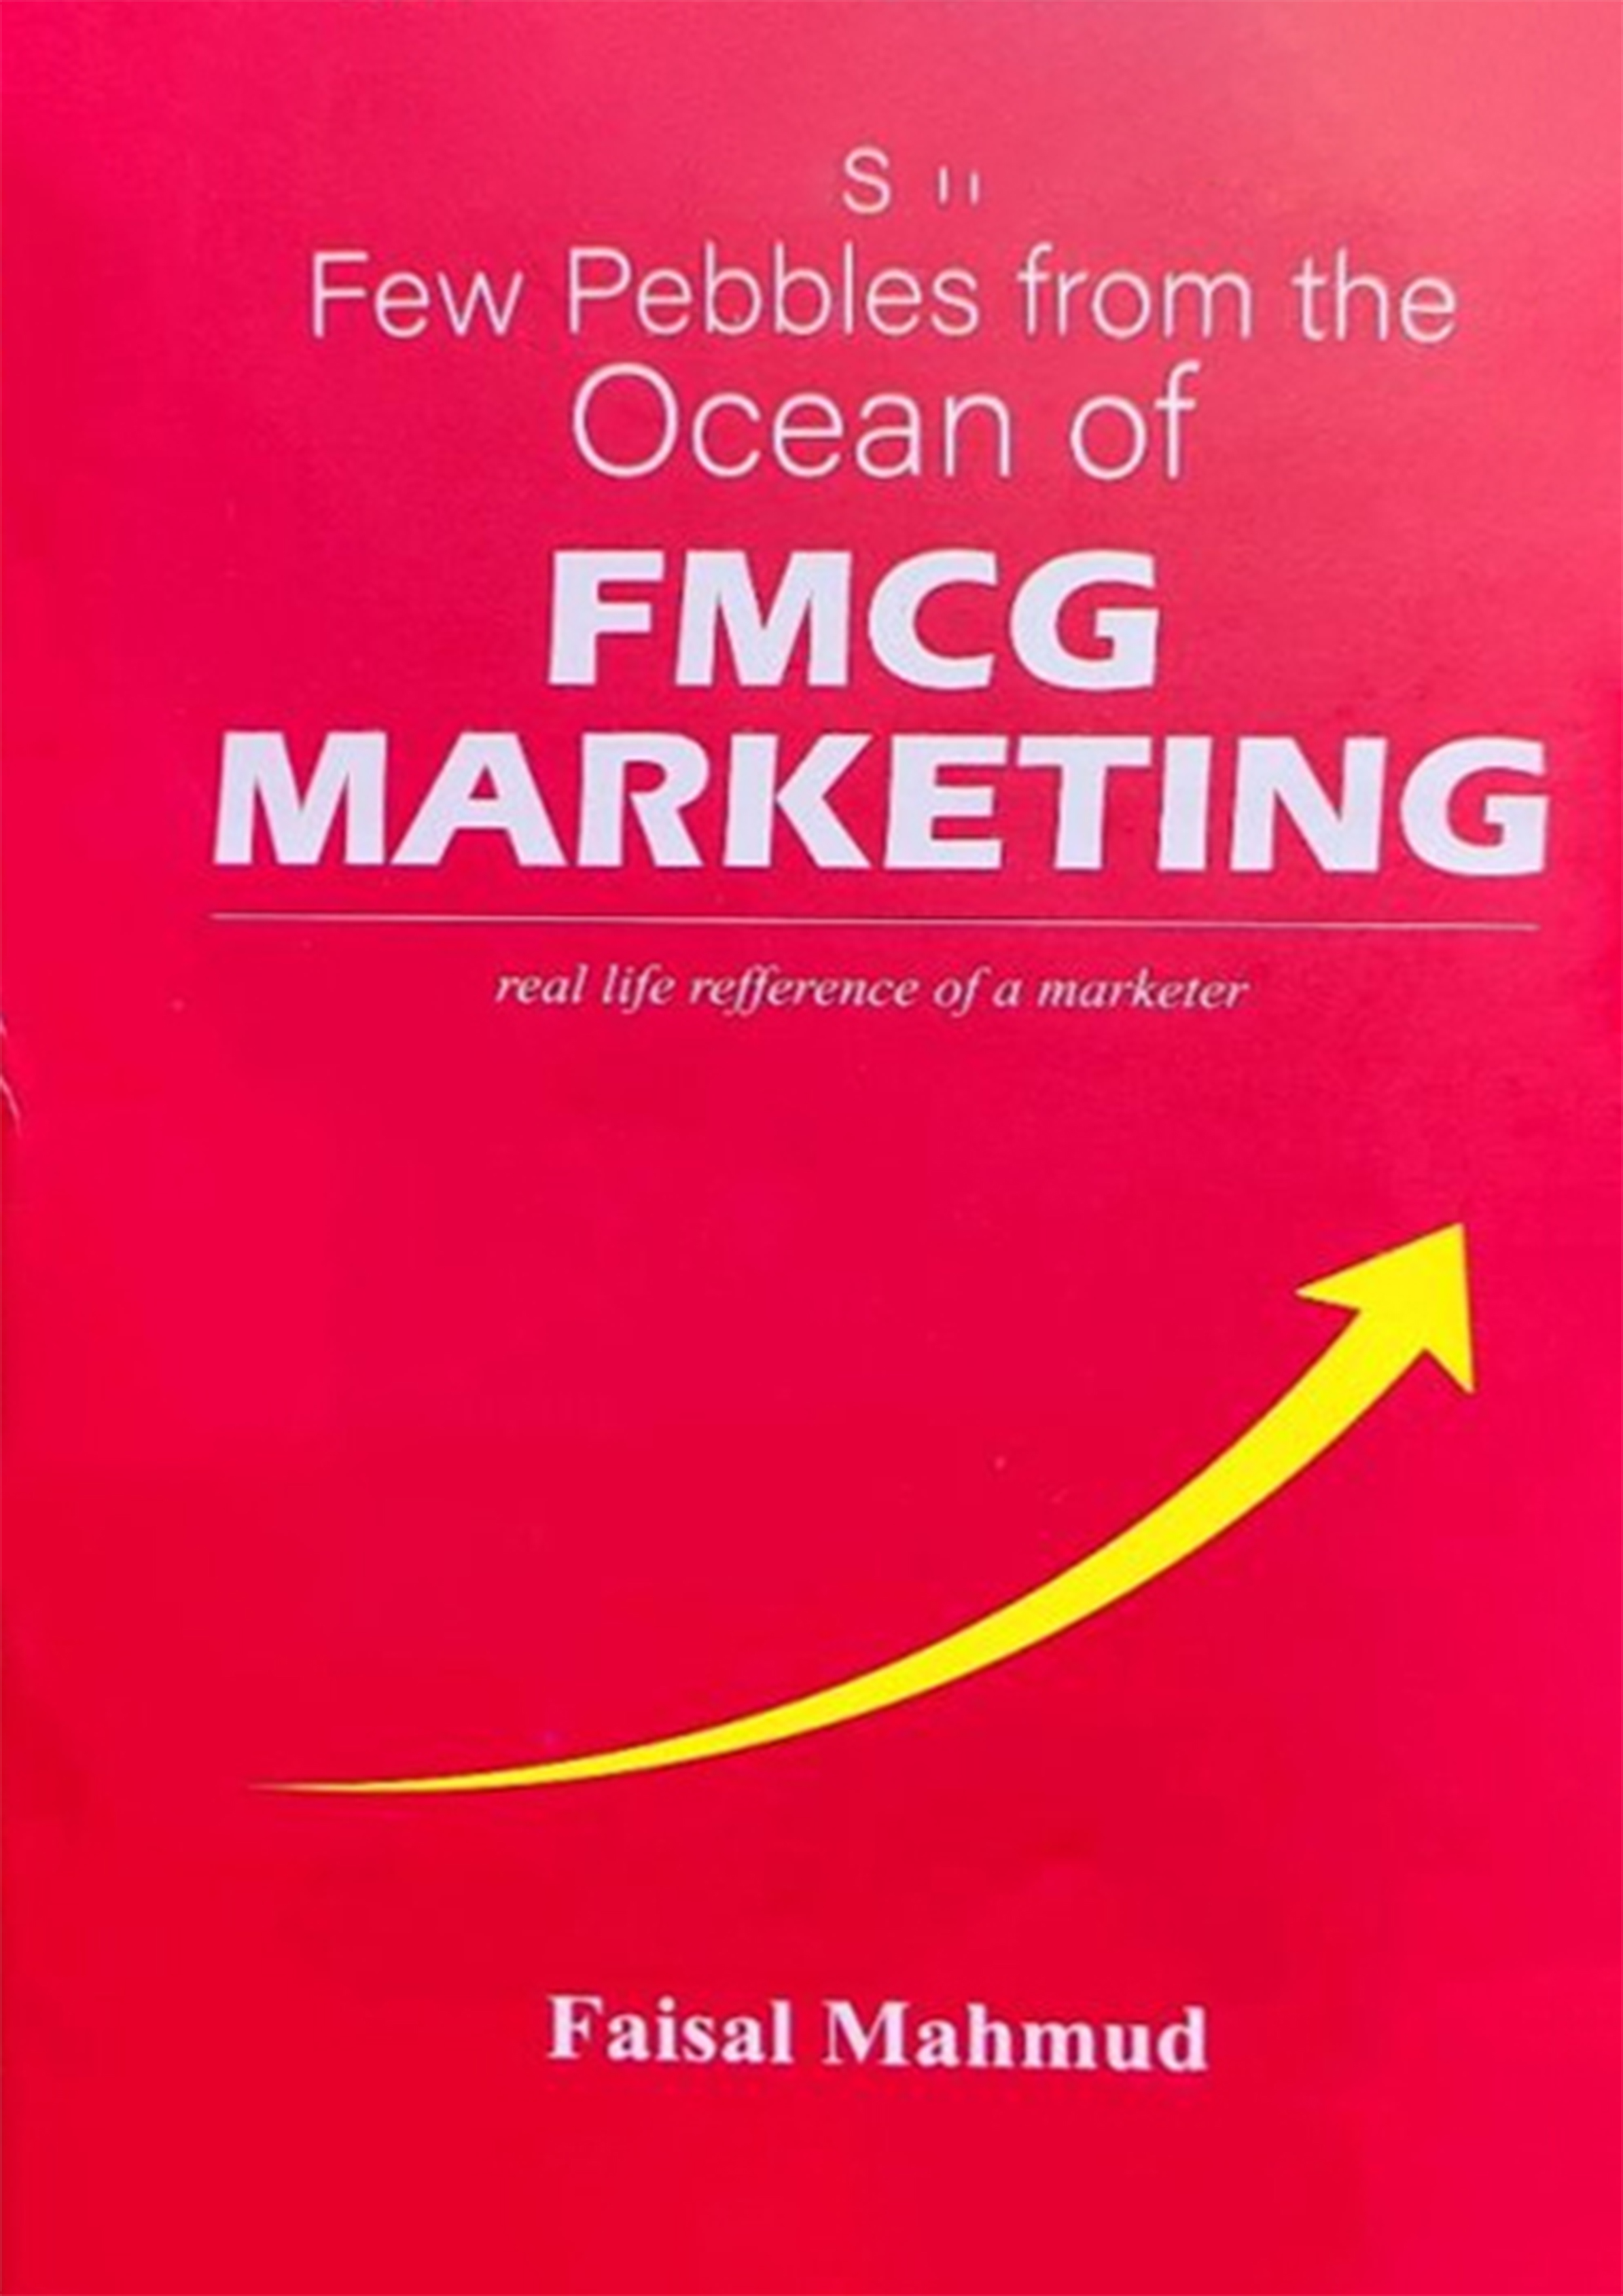 Few pebbles from the ocean of FMCG Marketing (হার্ডকভার)